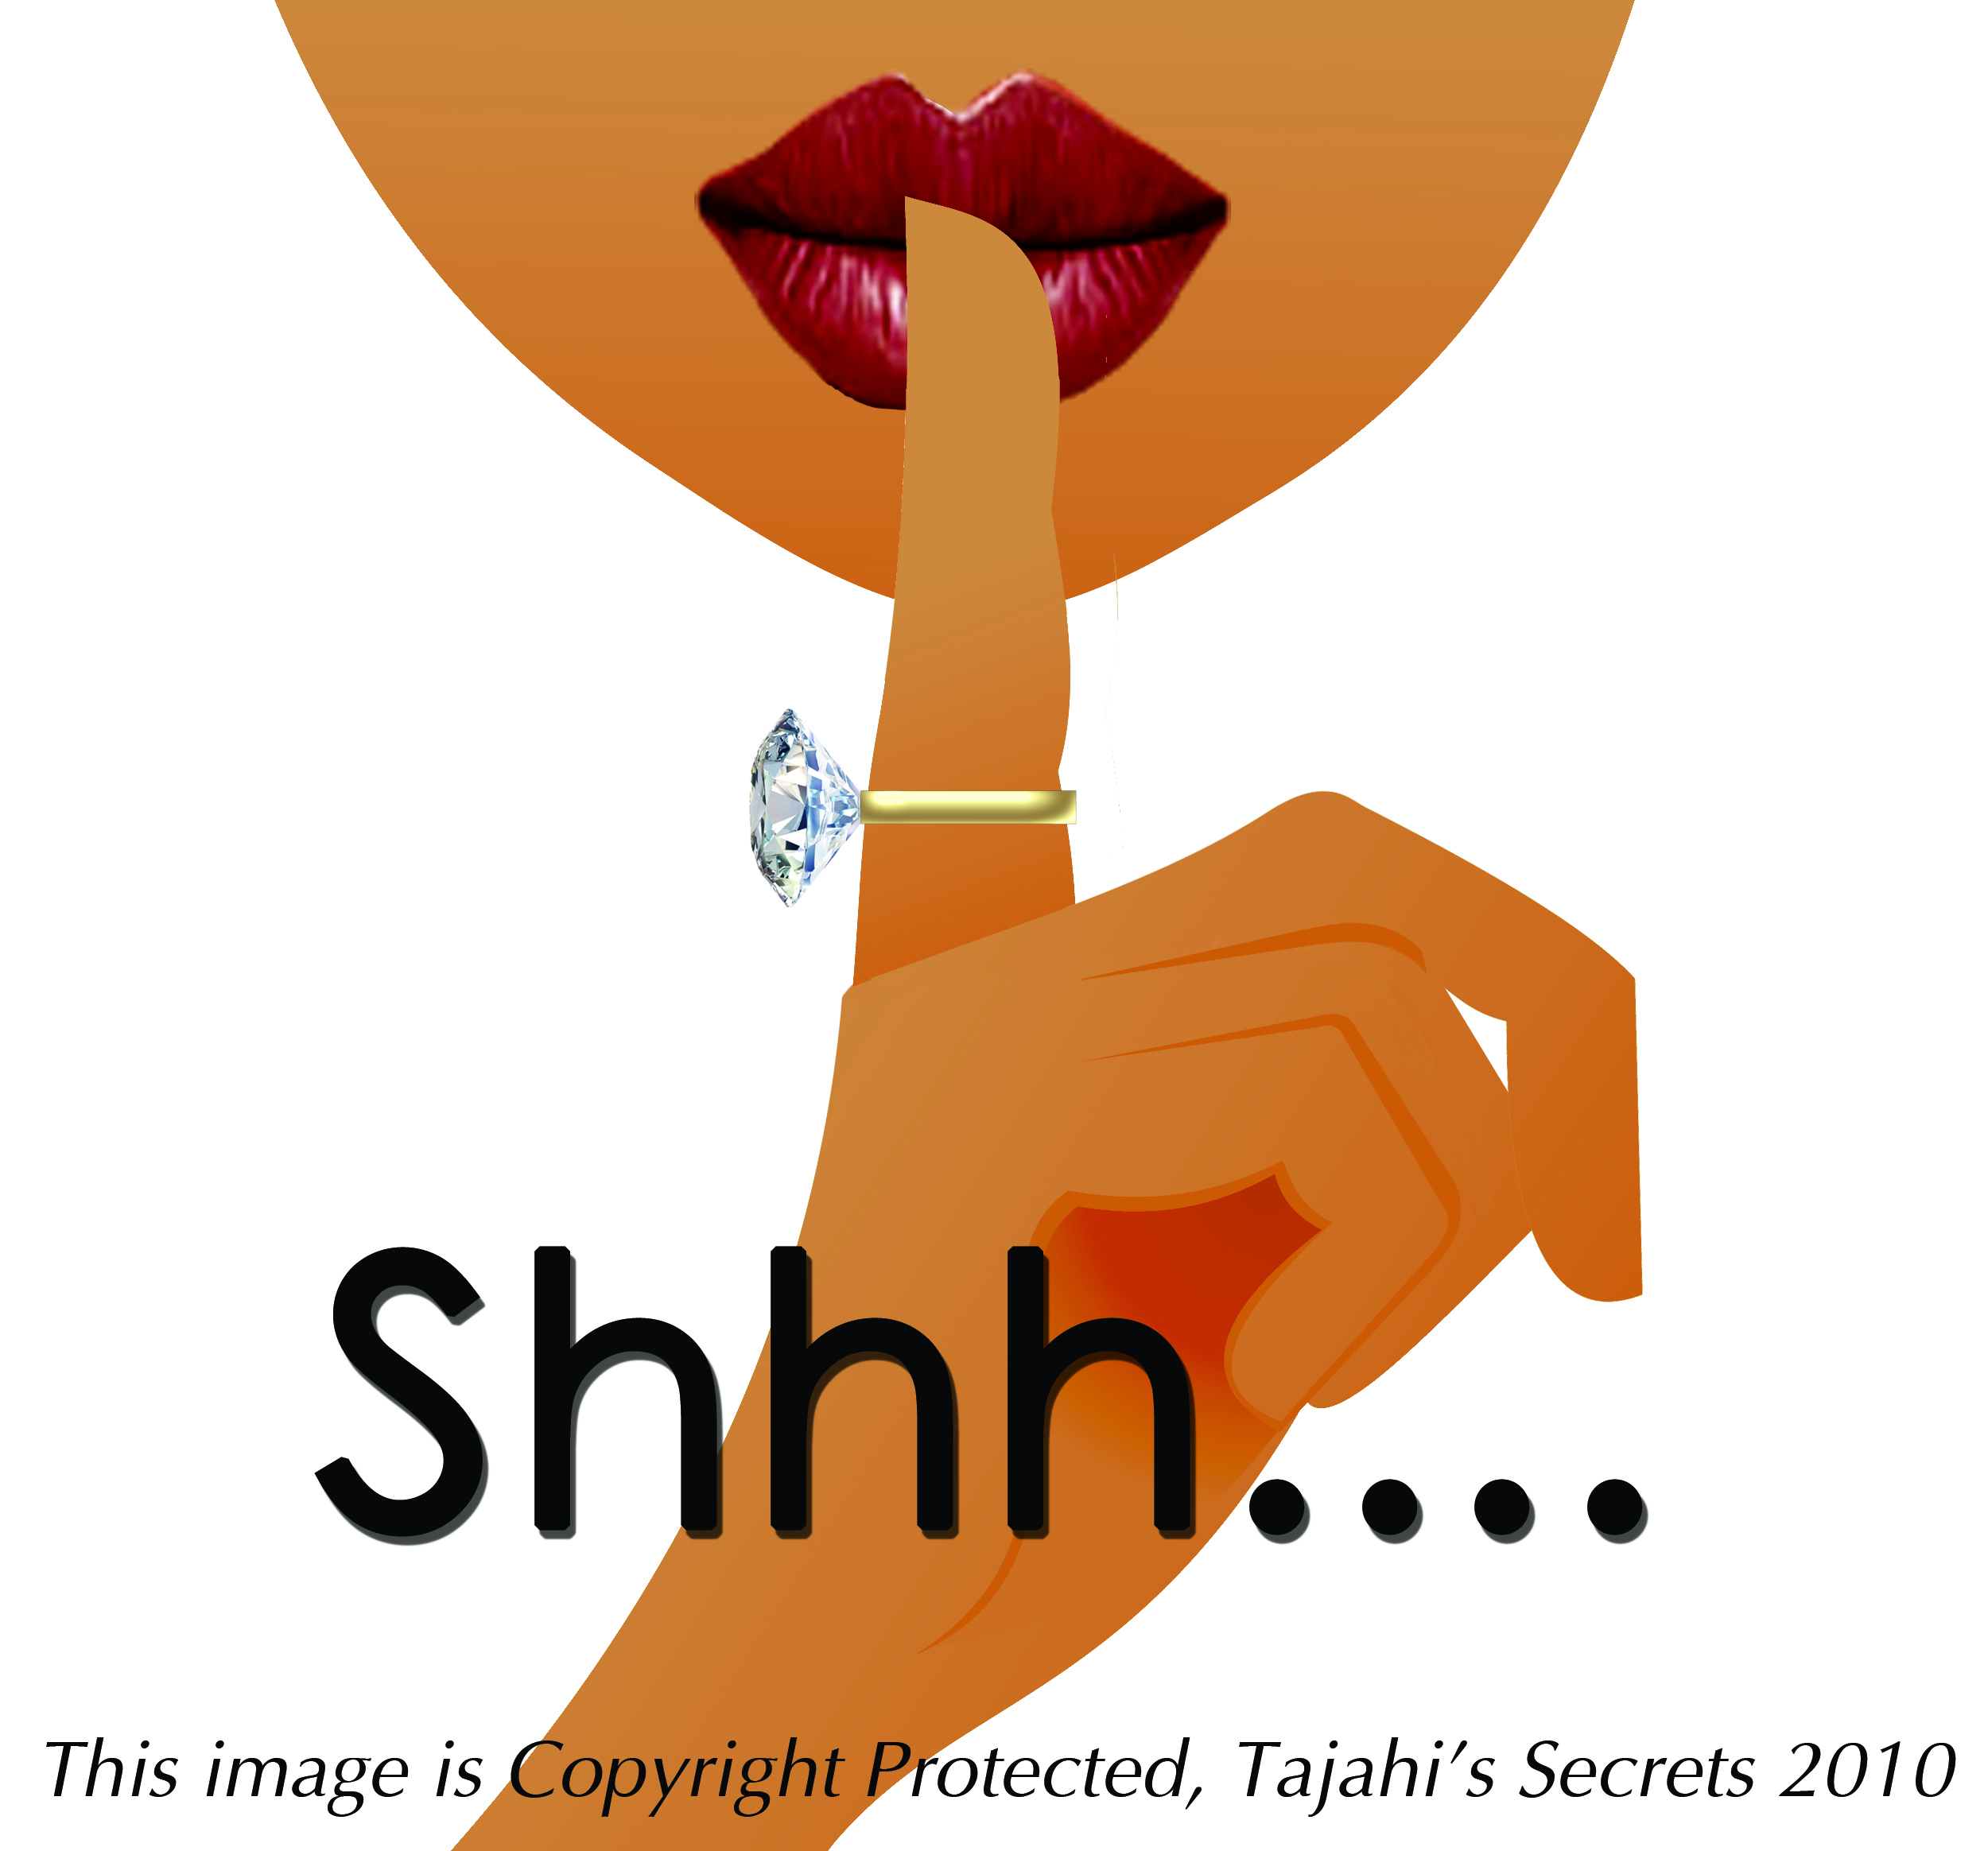 Free Shhh Cliparts, Download Free Clip Art, Free Clip Art on.